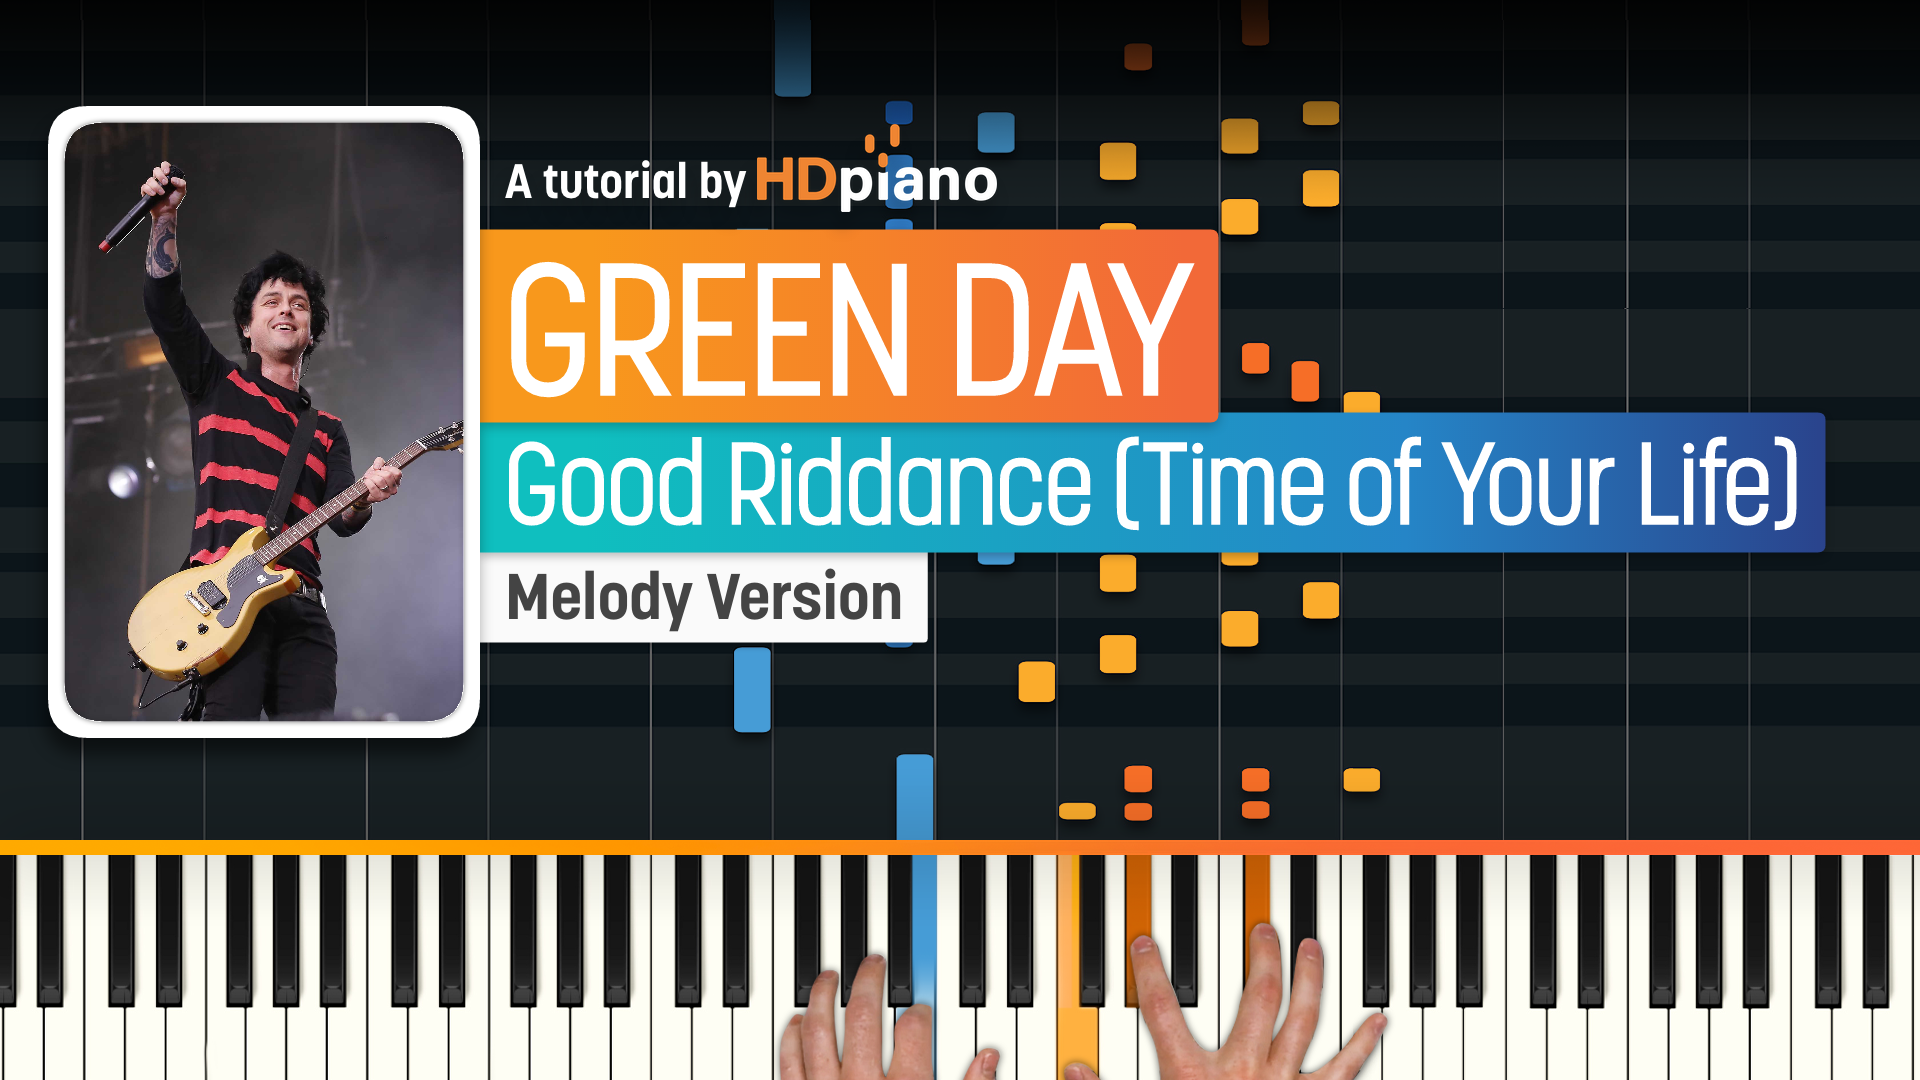 Green Day - Good Riddance (Time Of Your Life)